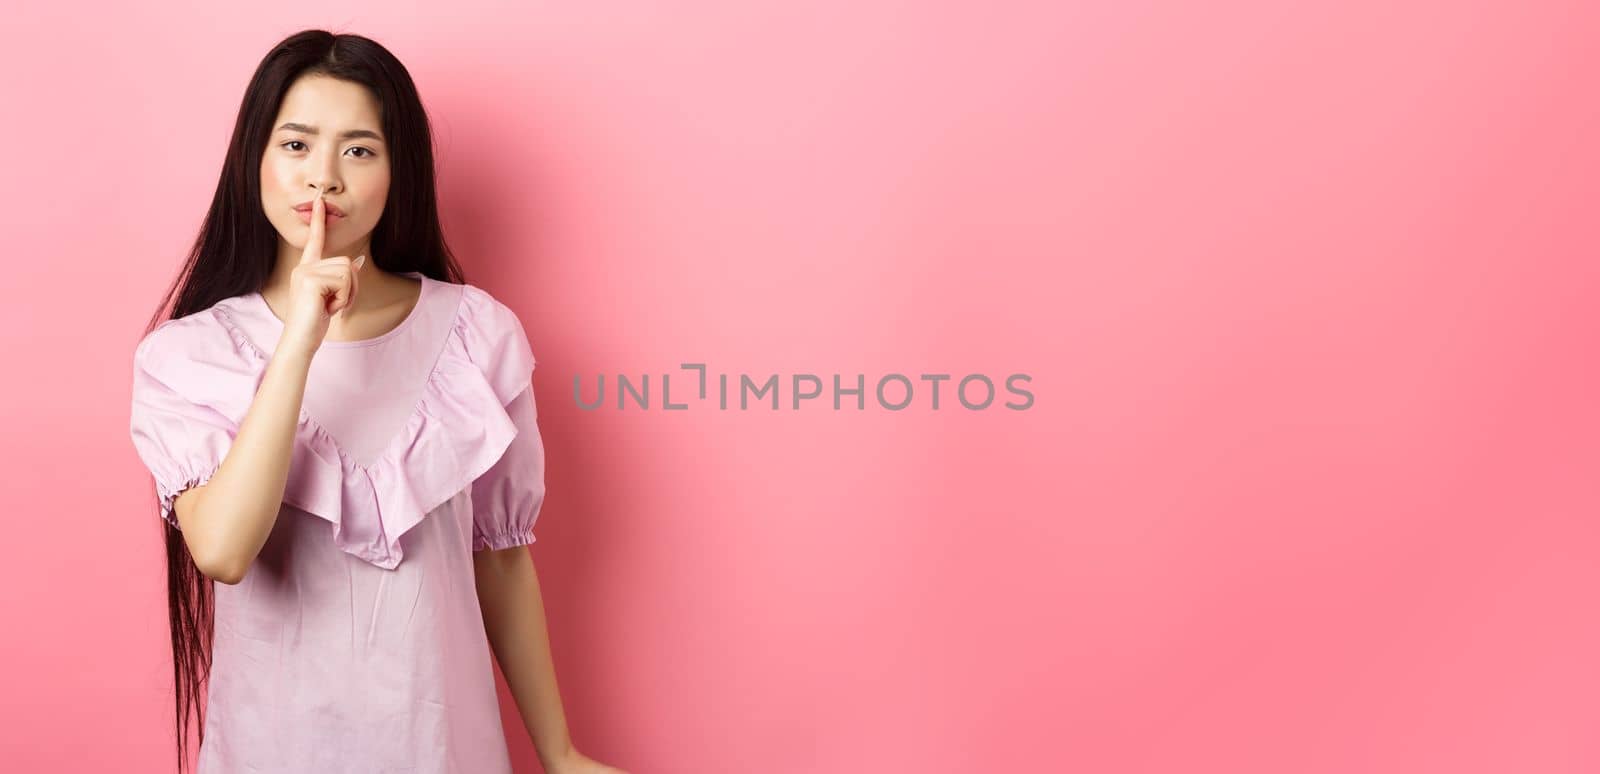 Cute asian girl tell to be quiet, scolding loud person, showing shush sign with finger pressed to lips, standing in dress on pink background.